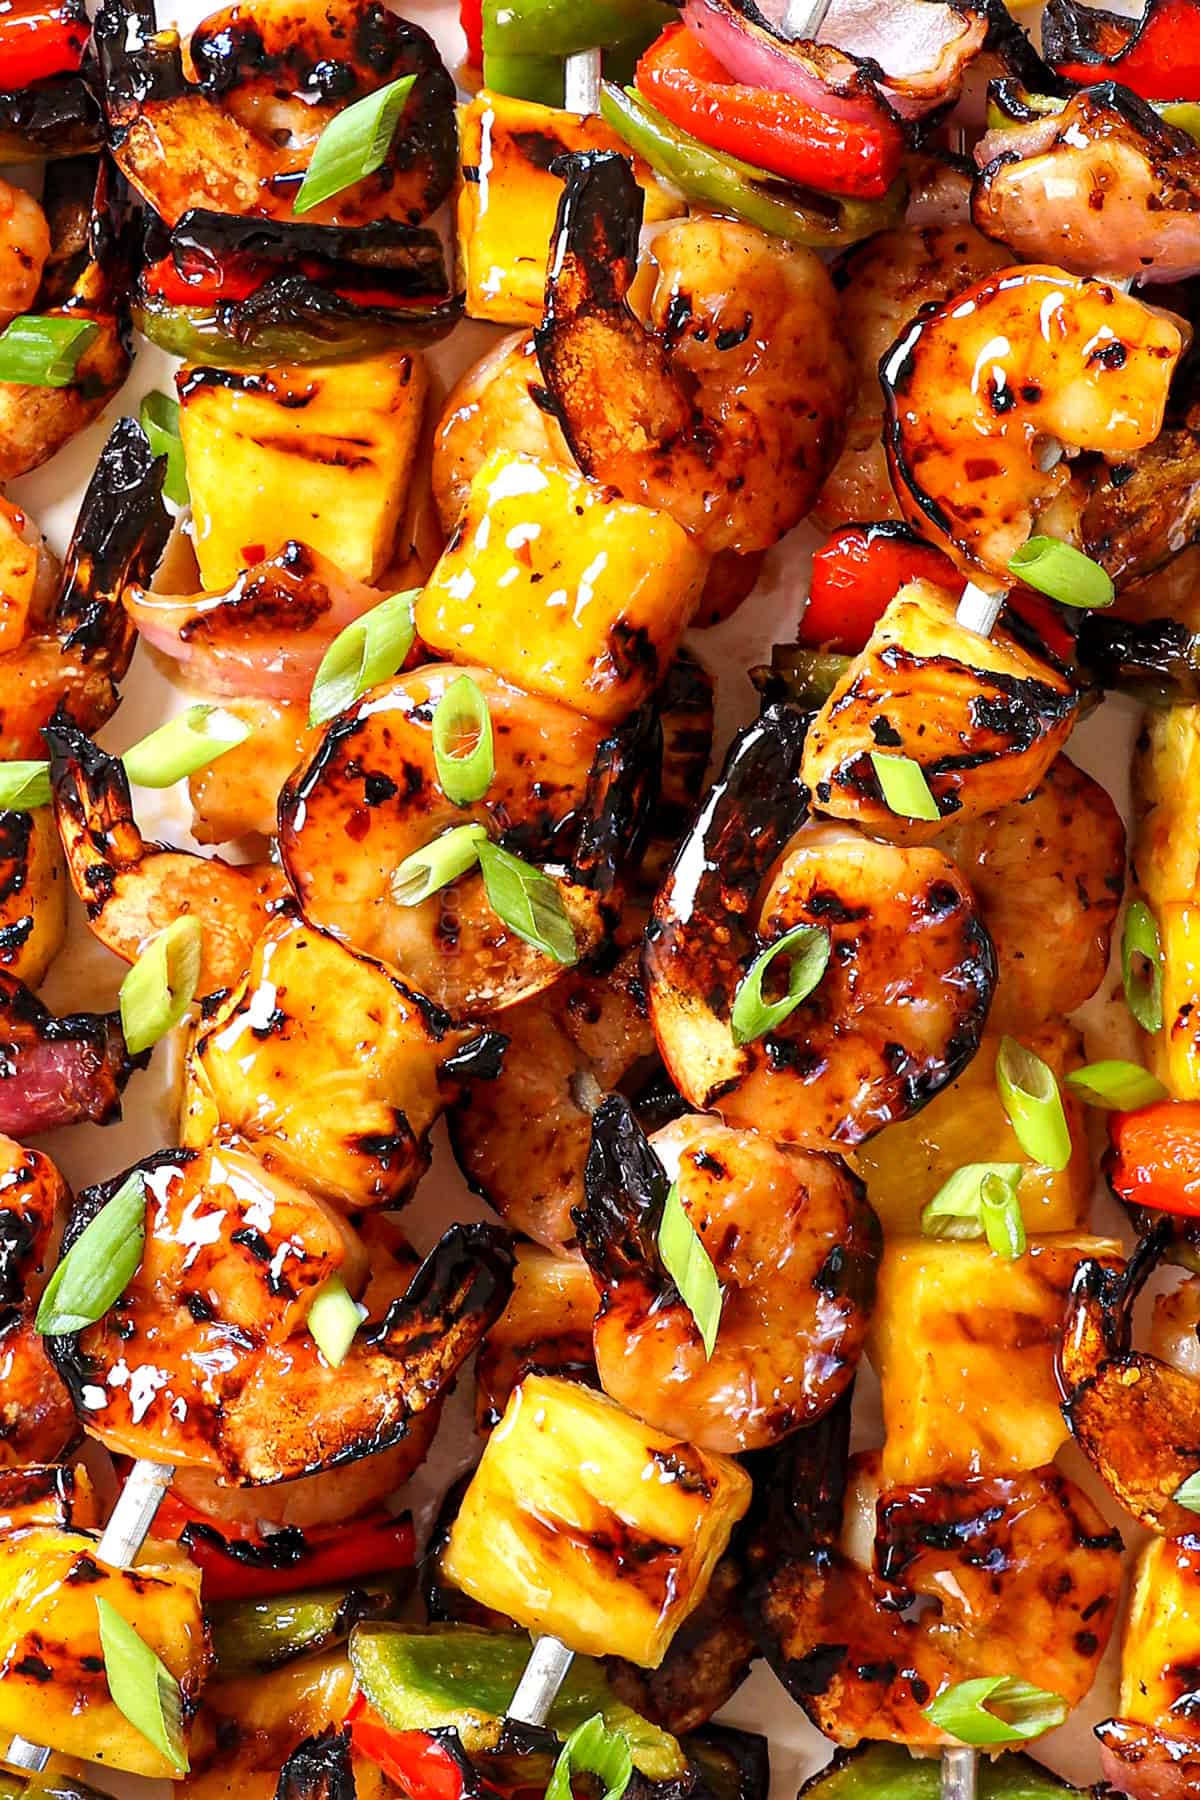 shrimp skewers brushed with a sweet and tangy glaze